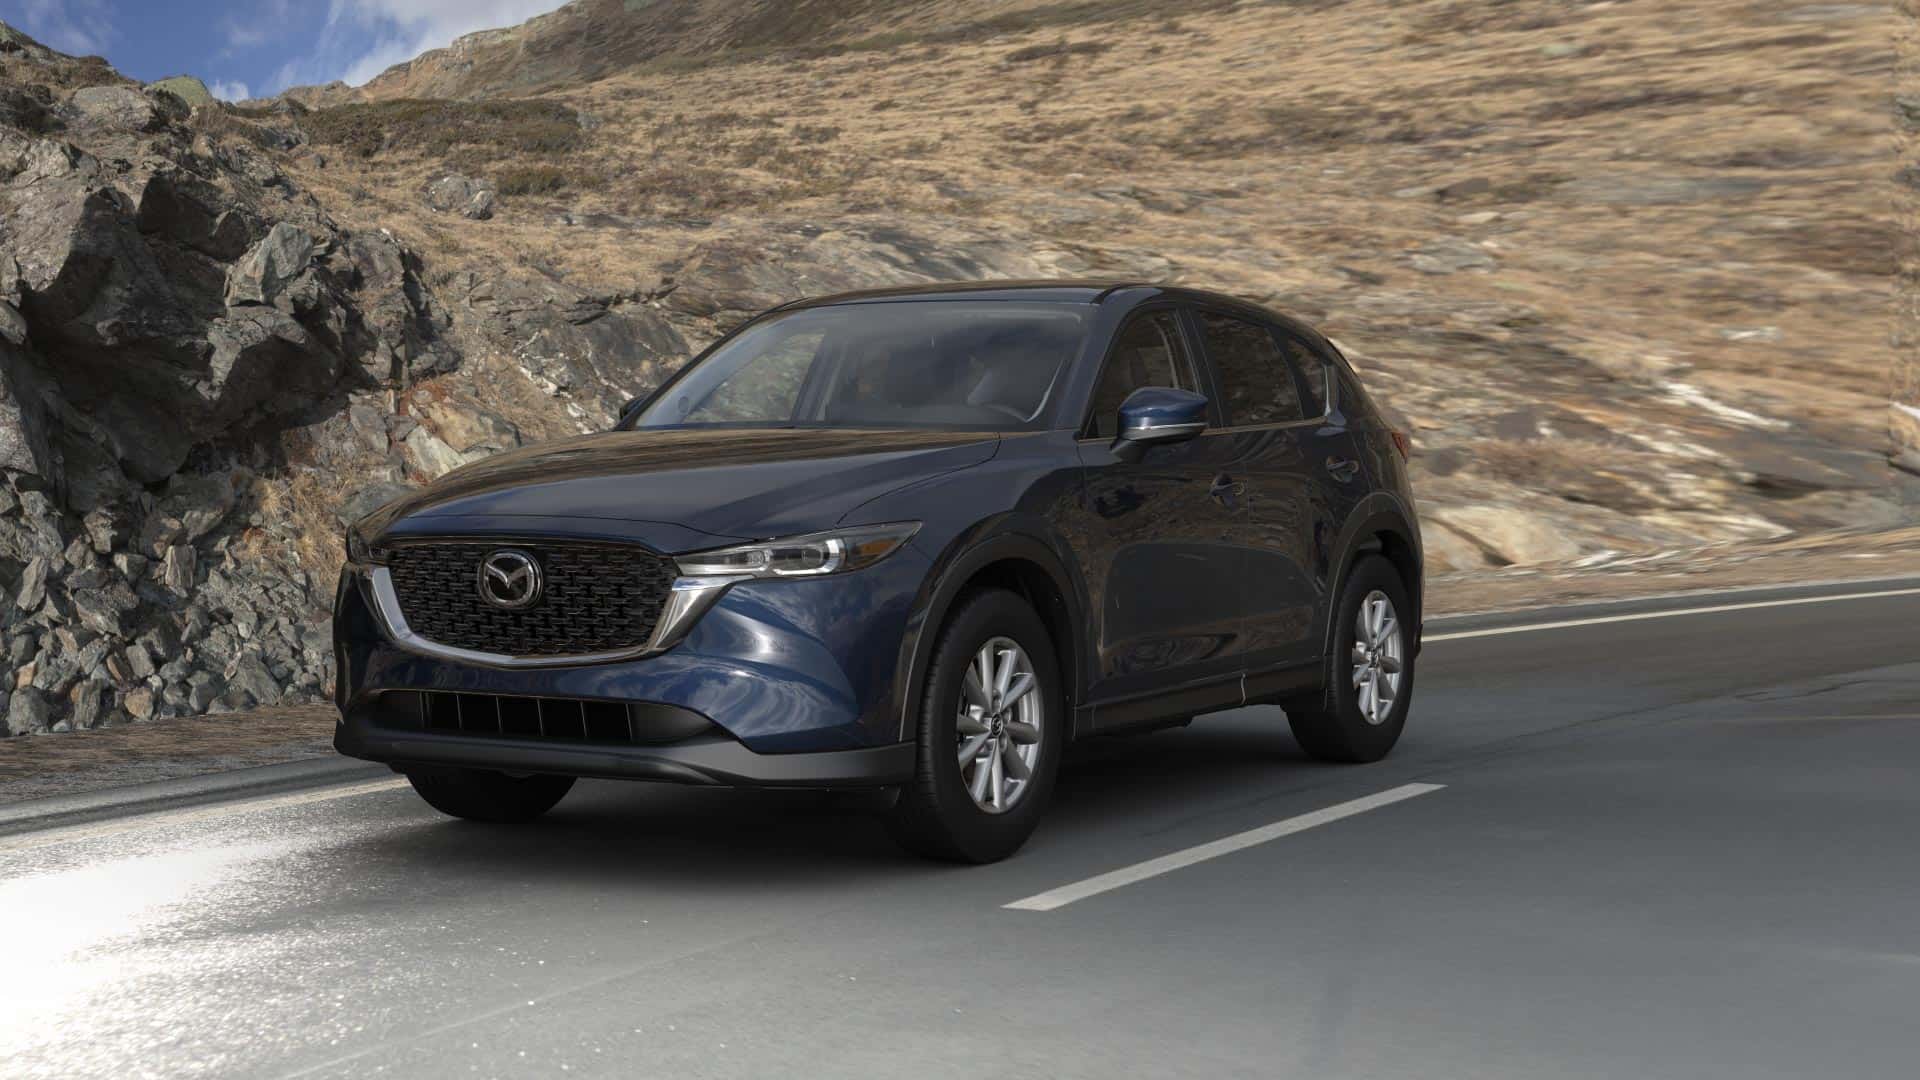 2023 Mazda CX-5 2.5 S Select Deep Crystal Blue Mica | Mazda of Milford in Milford CT